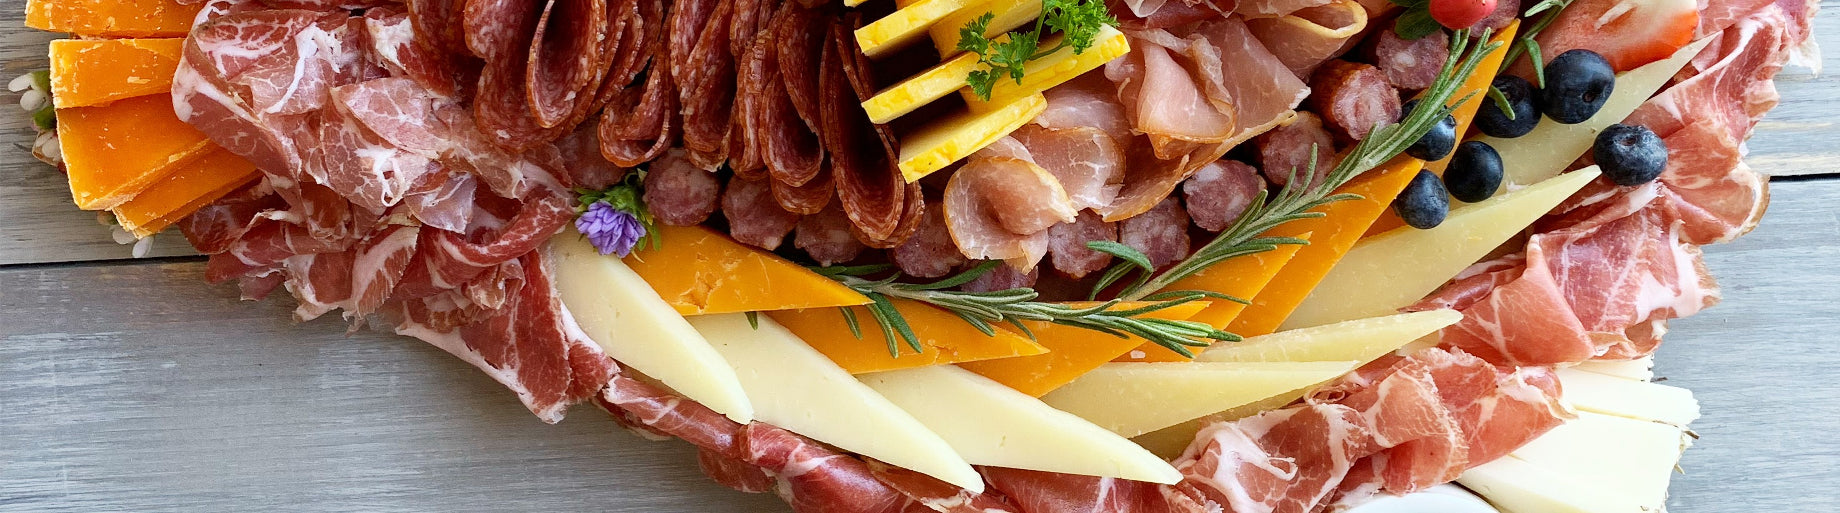 Cheese and Charcuterie online sale - Cured and Cultivated 